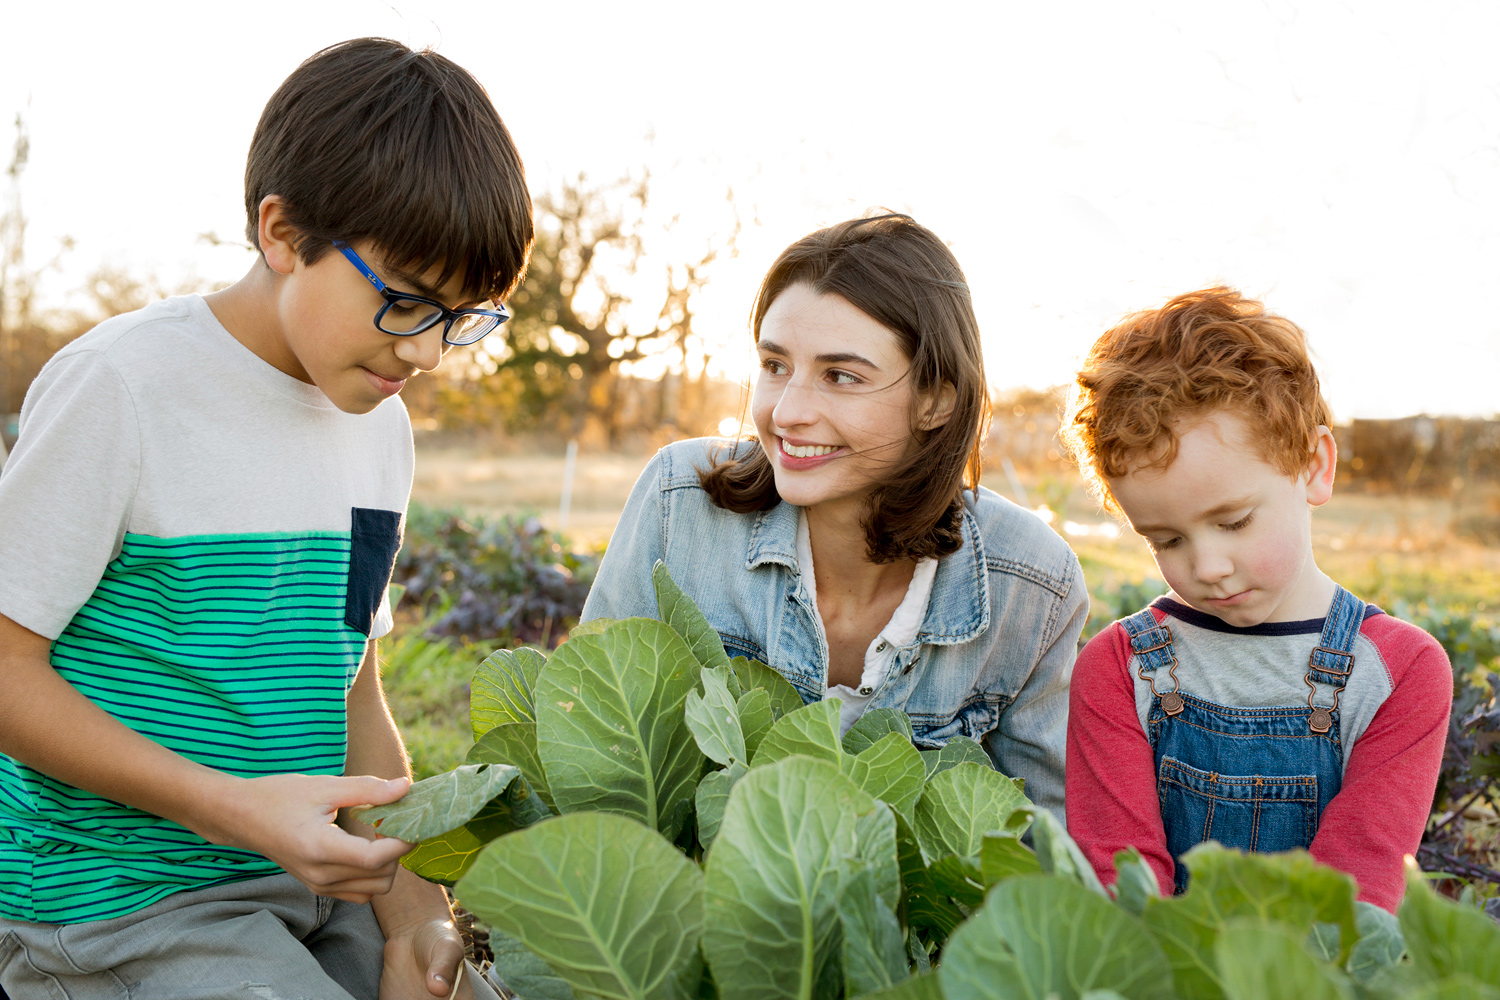 Harvesting plants with kids by lifestyle photographer Buff Strickland